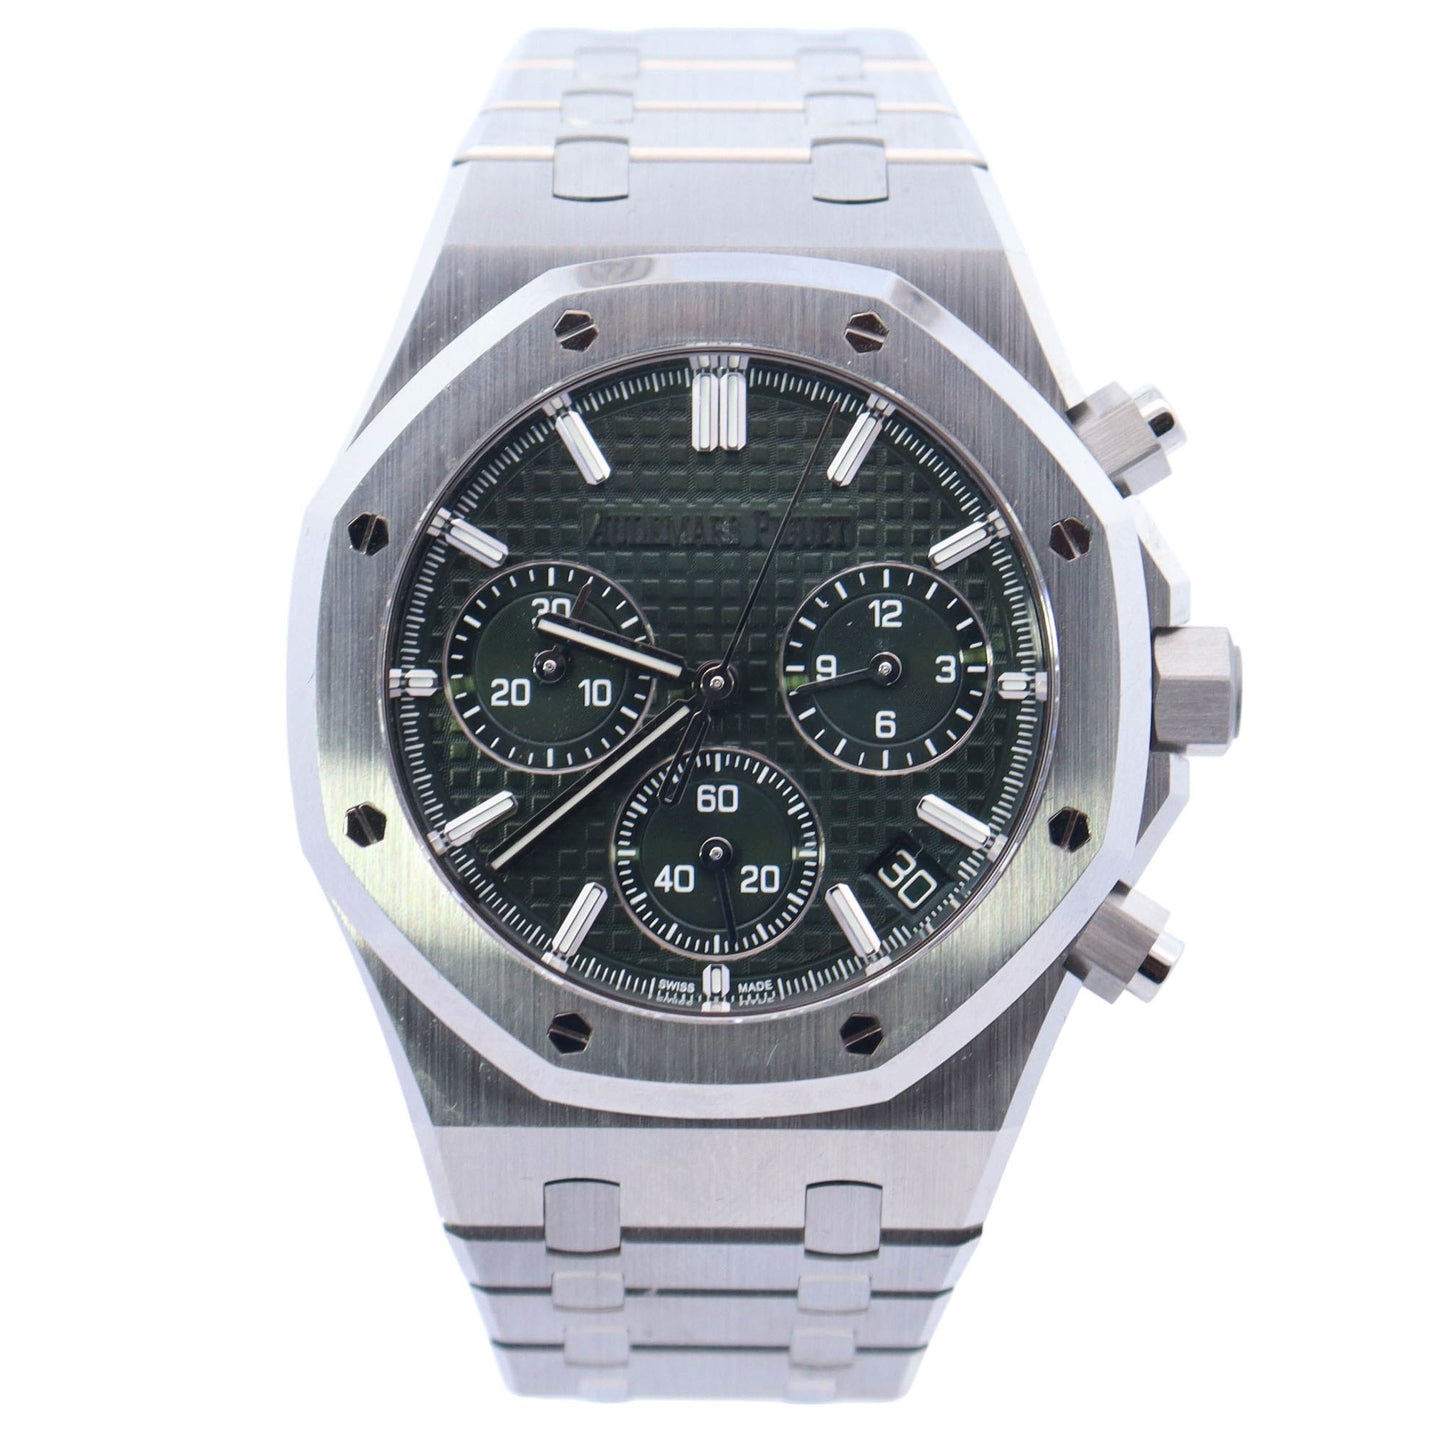 Audemars Piguet Royal Oak " 50th Anniversary" 41mm Stainless Steel Green Chronograph Dial Watch Reference# 26240ST.OO.1320ST.04 - Happy Jewelers Fine Jewelry Lifetime Warranty